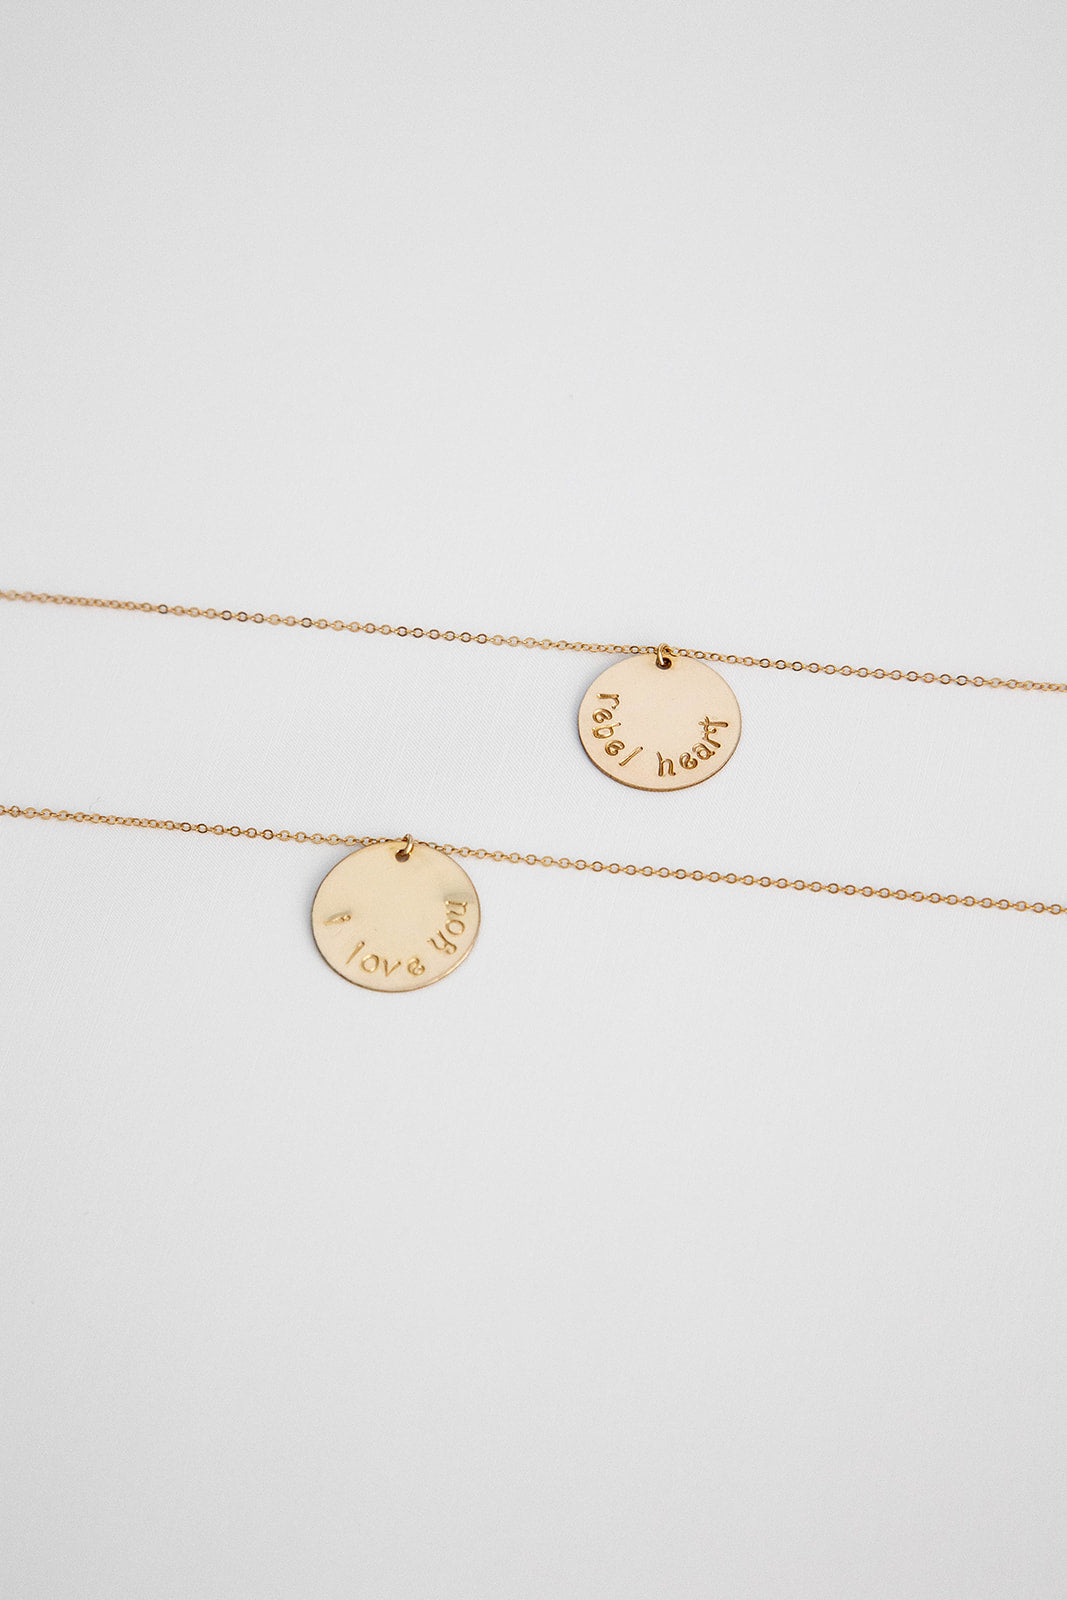 Two 14k gold filled cable link chain necklaces with 19.1mm 14k gold hand stamped disc lay on a white background flatlay.